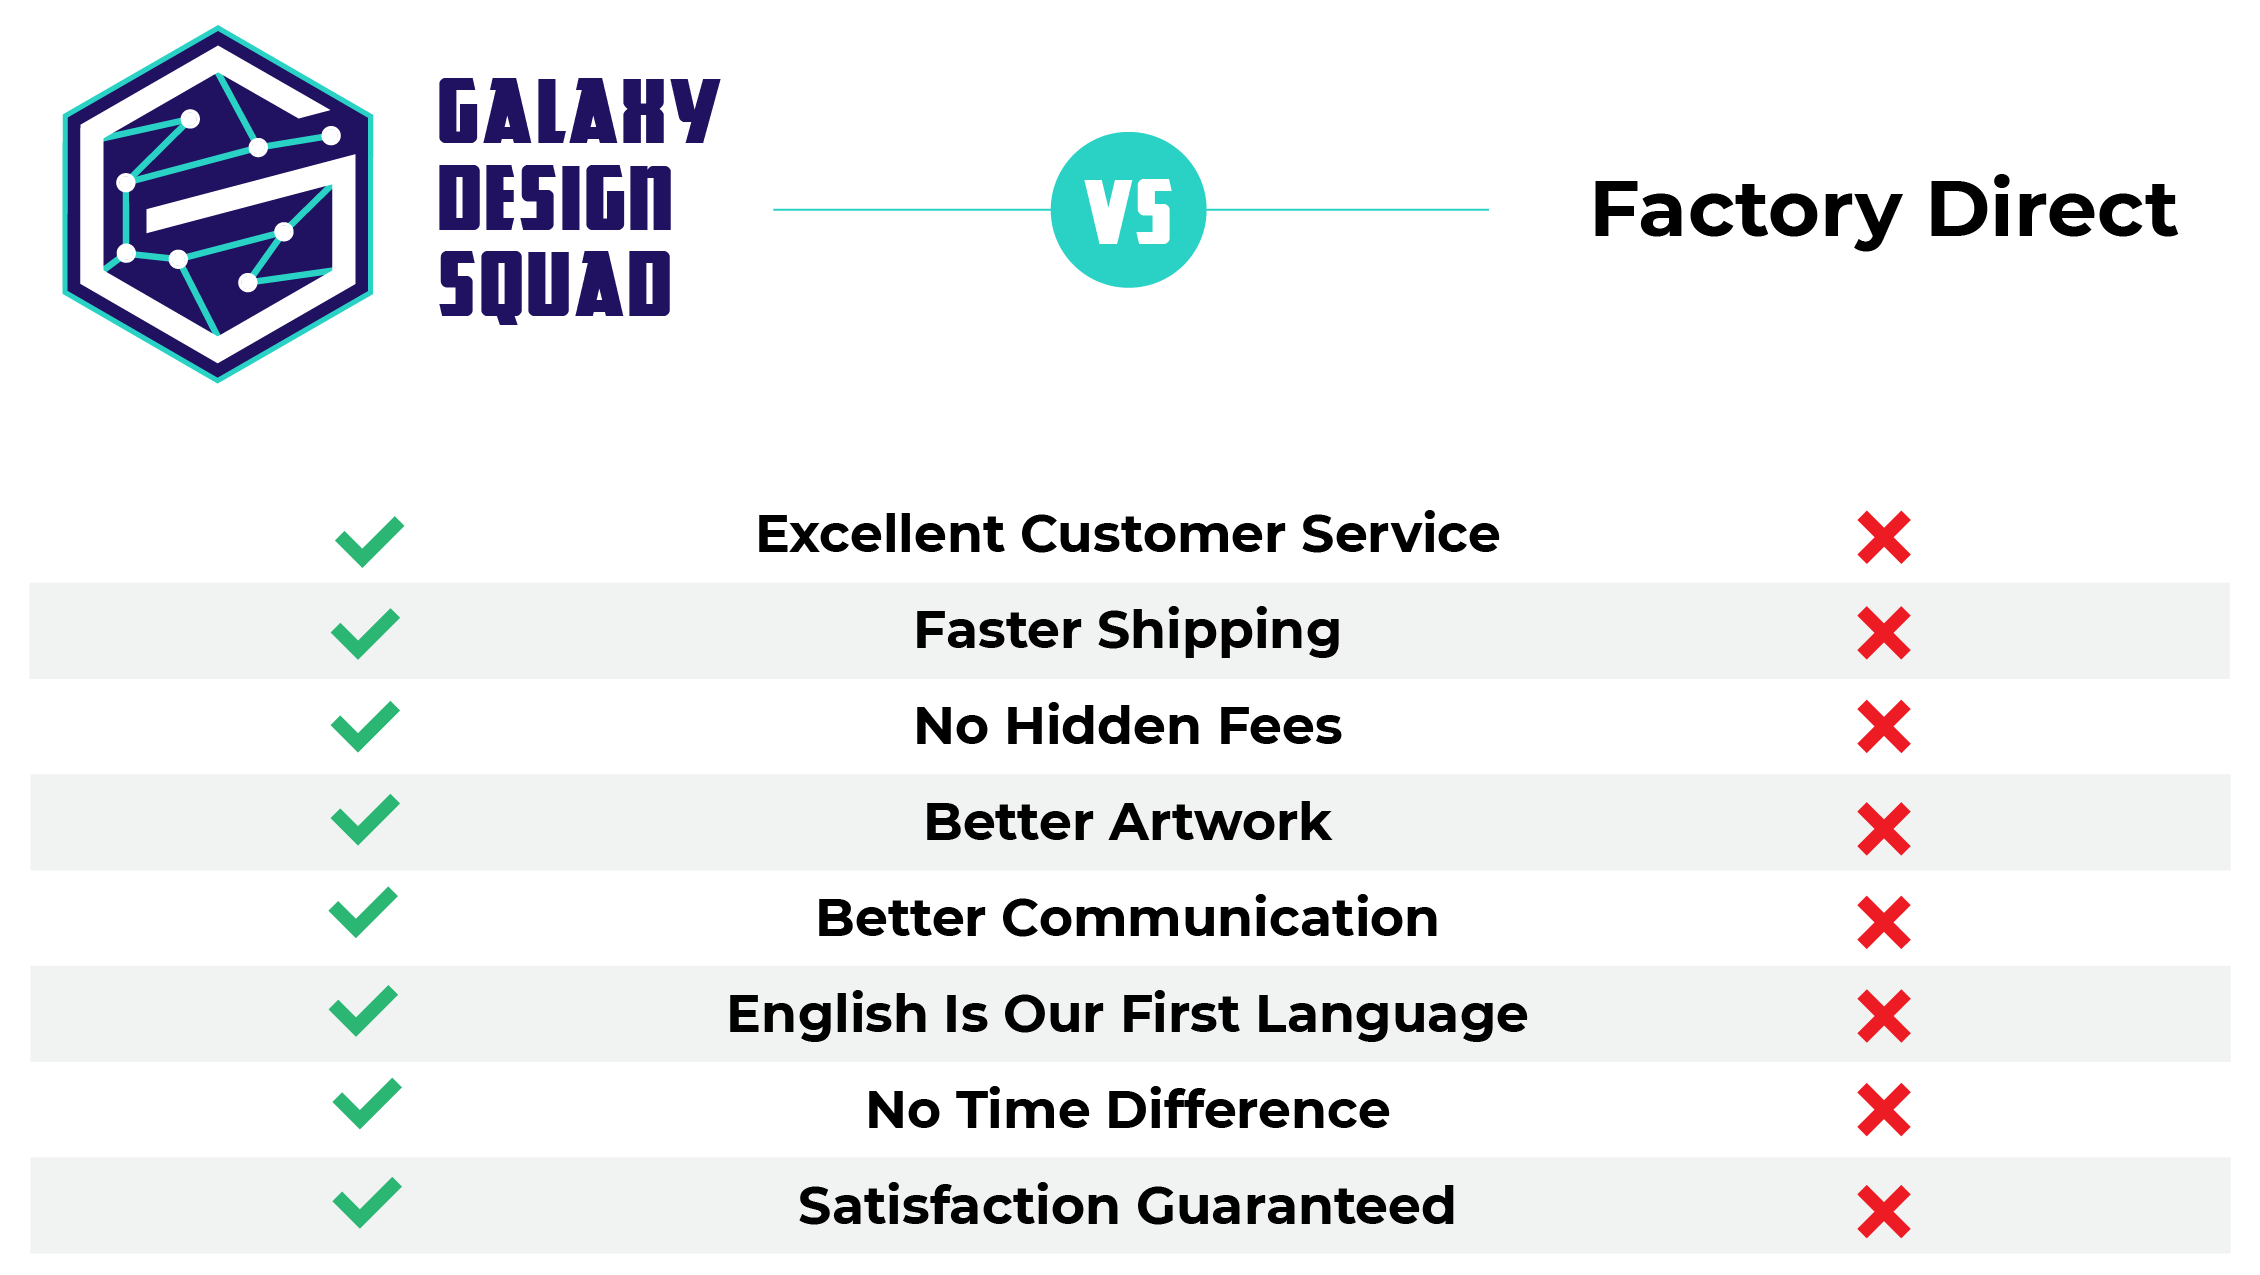 benefits of working with galaxy design squad list